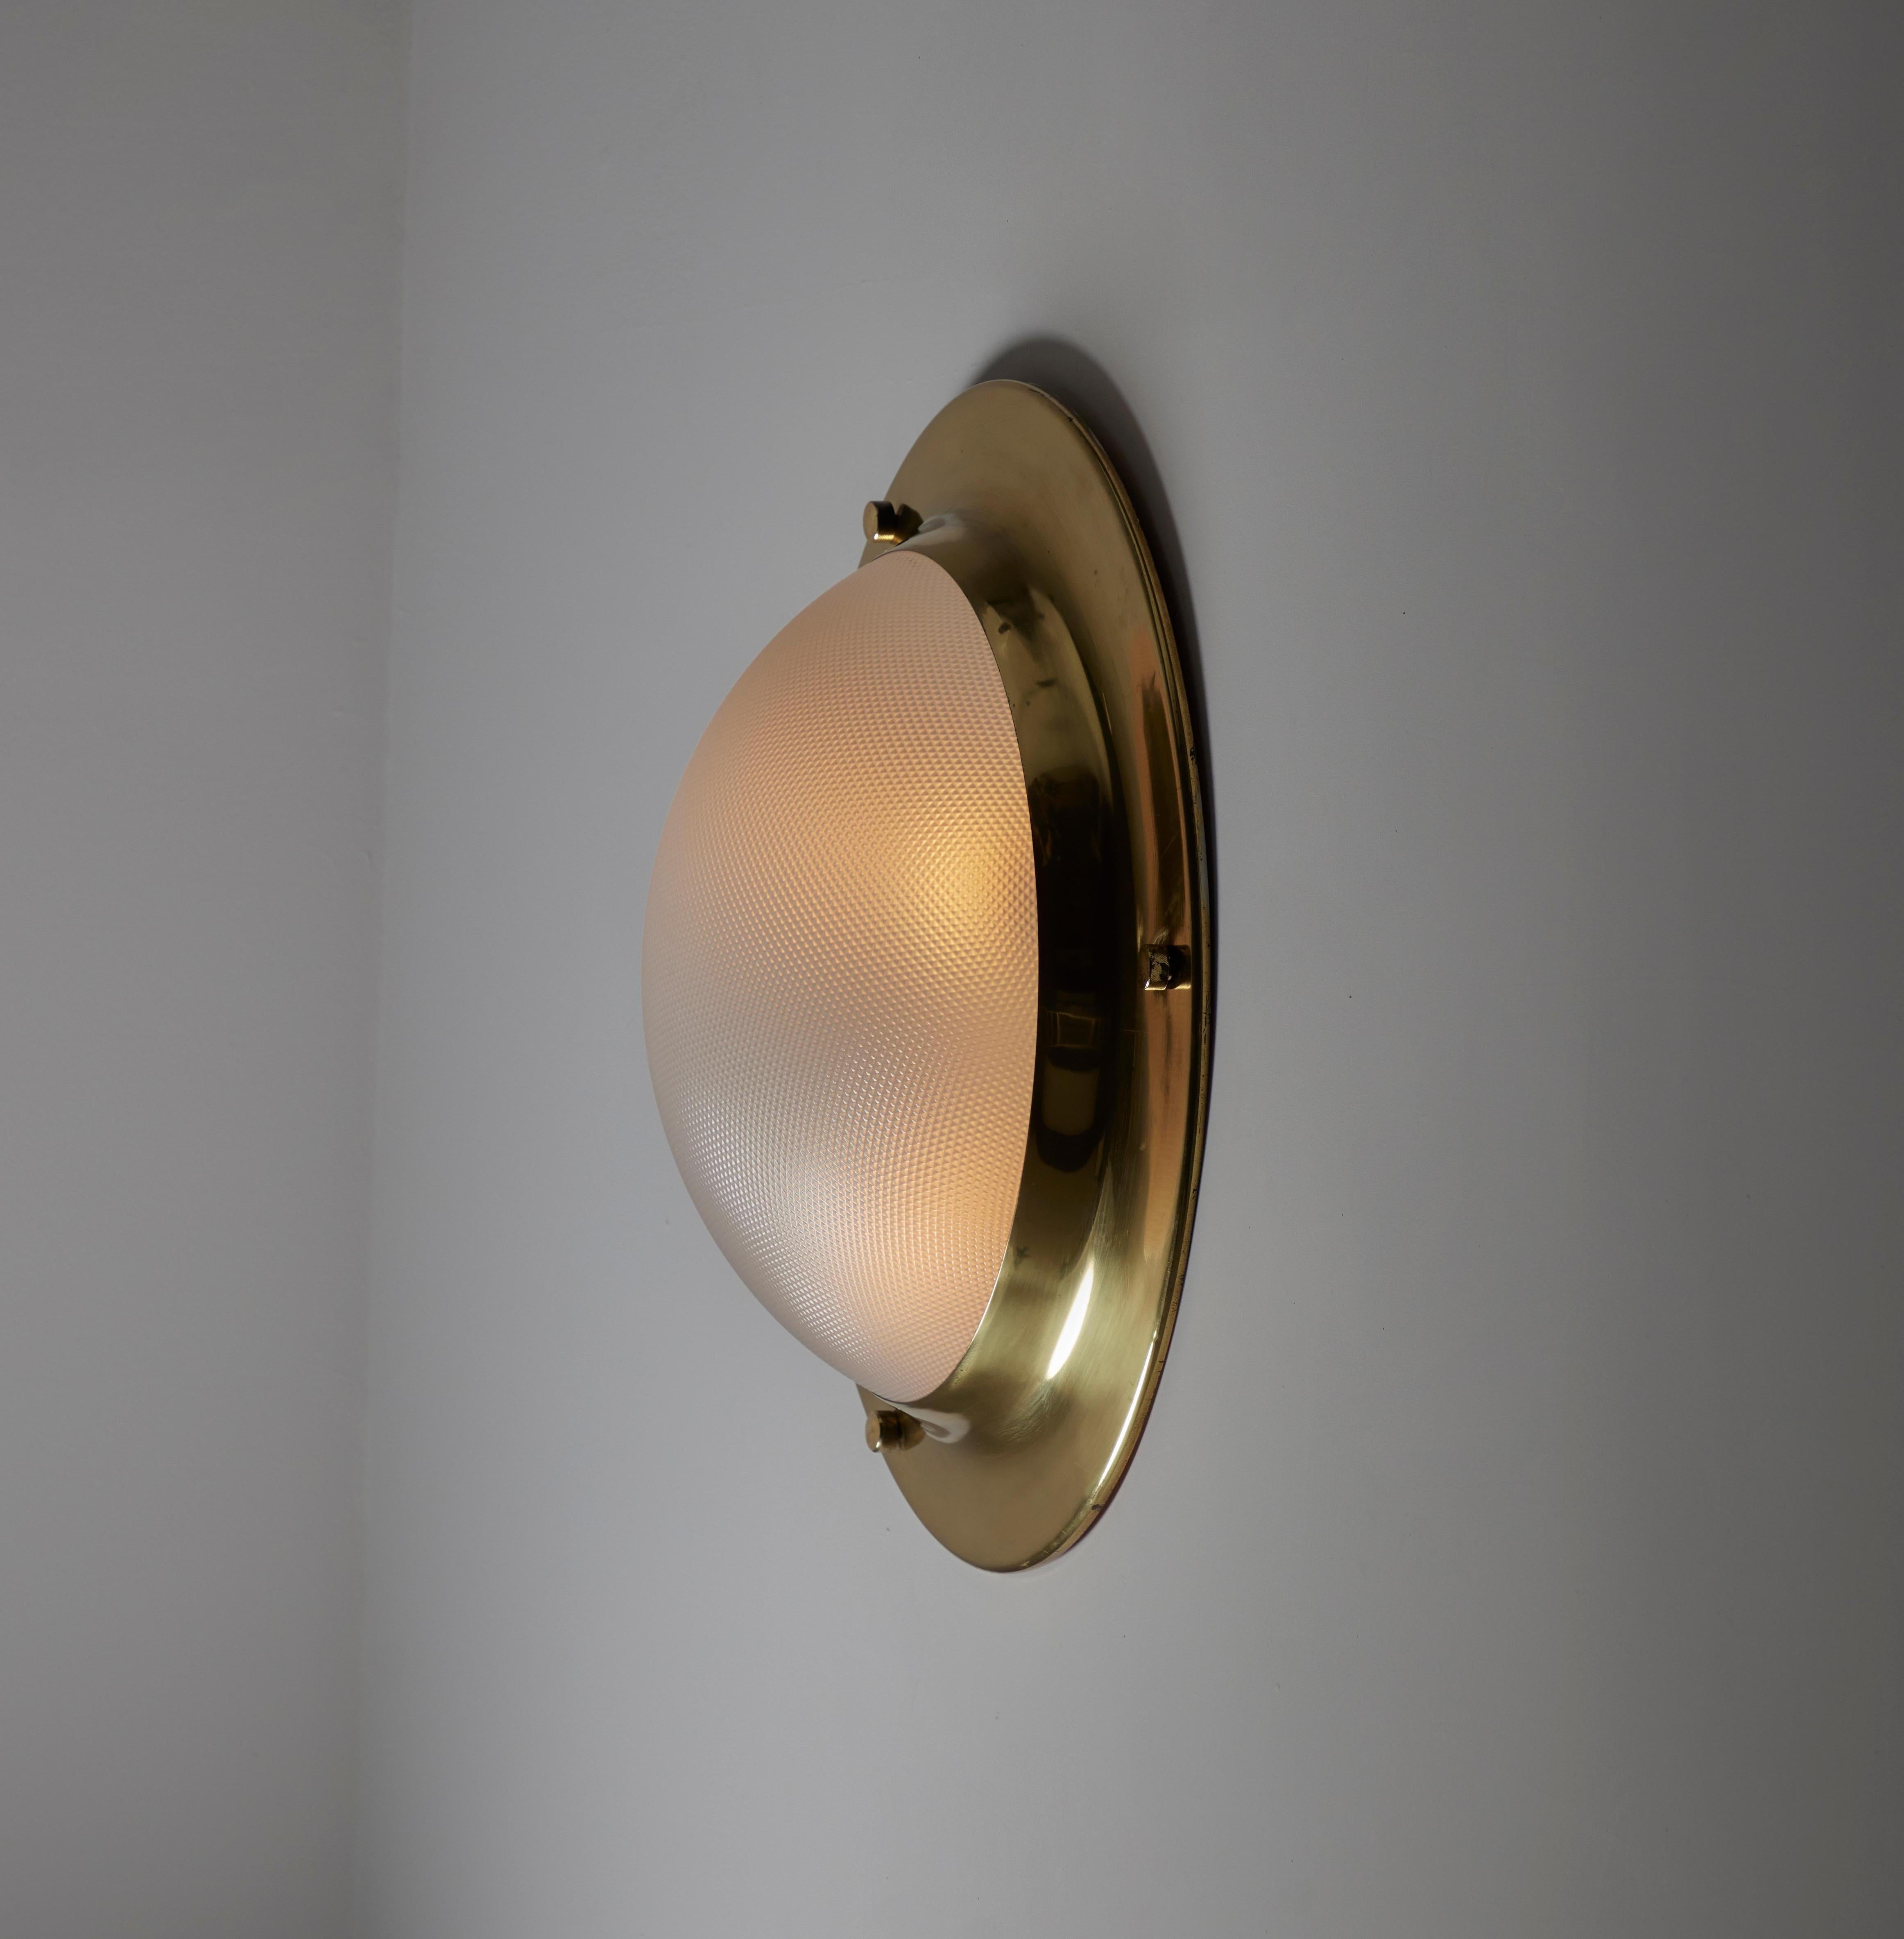 XL Model LSP6 'Tommy' Flush Mount by Luigi Caccia Dominioni for Azucena. Designed and manufactured in Italy, circa the 1960s. Nautical style XL sconce featuring a polished brass rim and a cross-hatched textured acrylic diffsuer. The light holds a